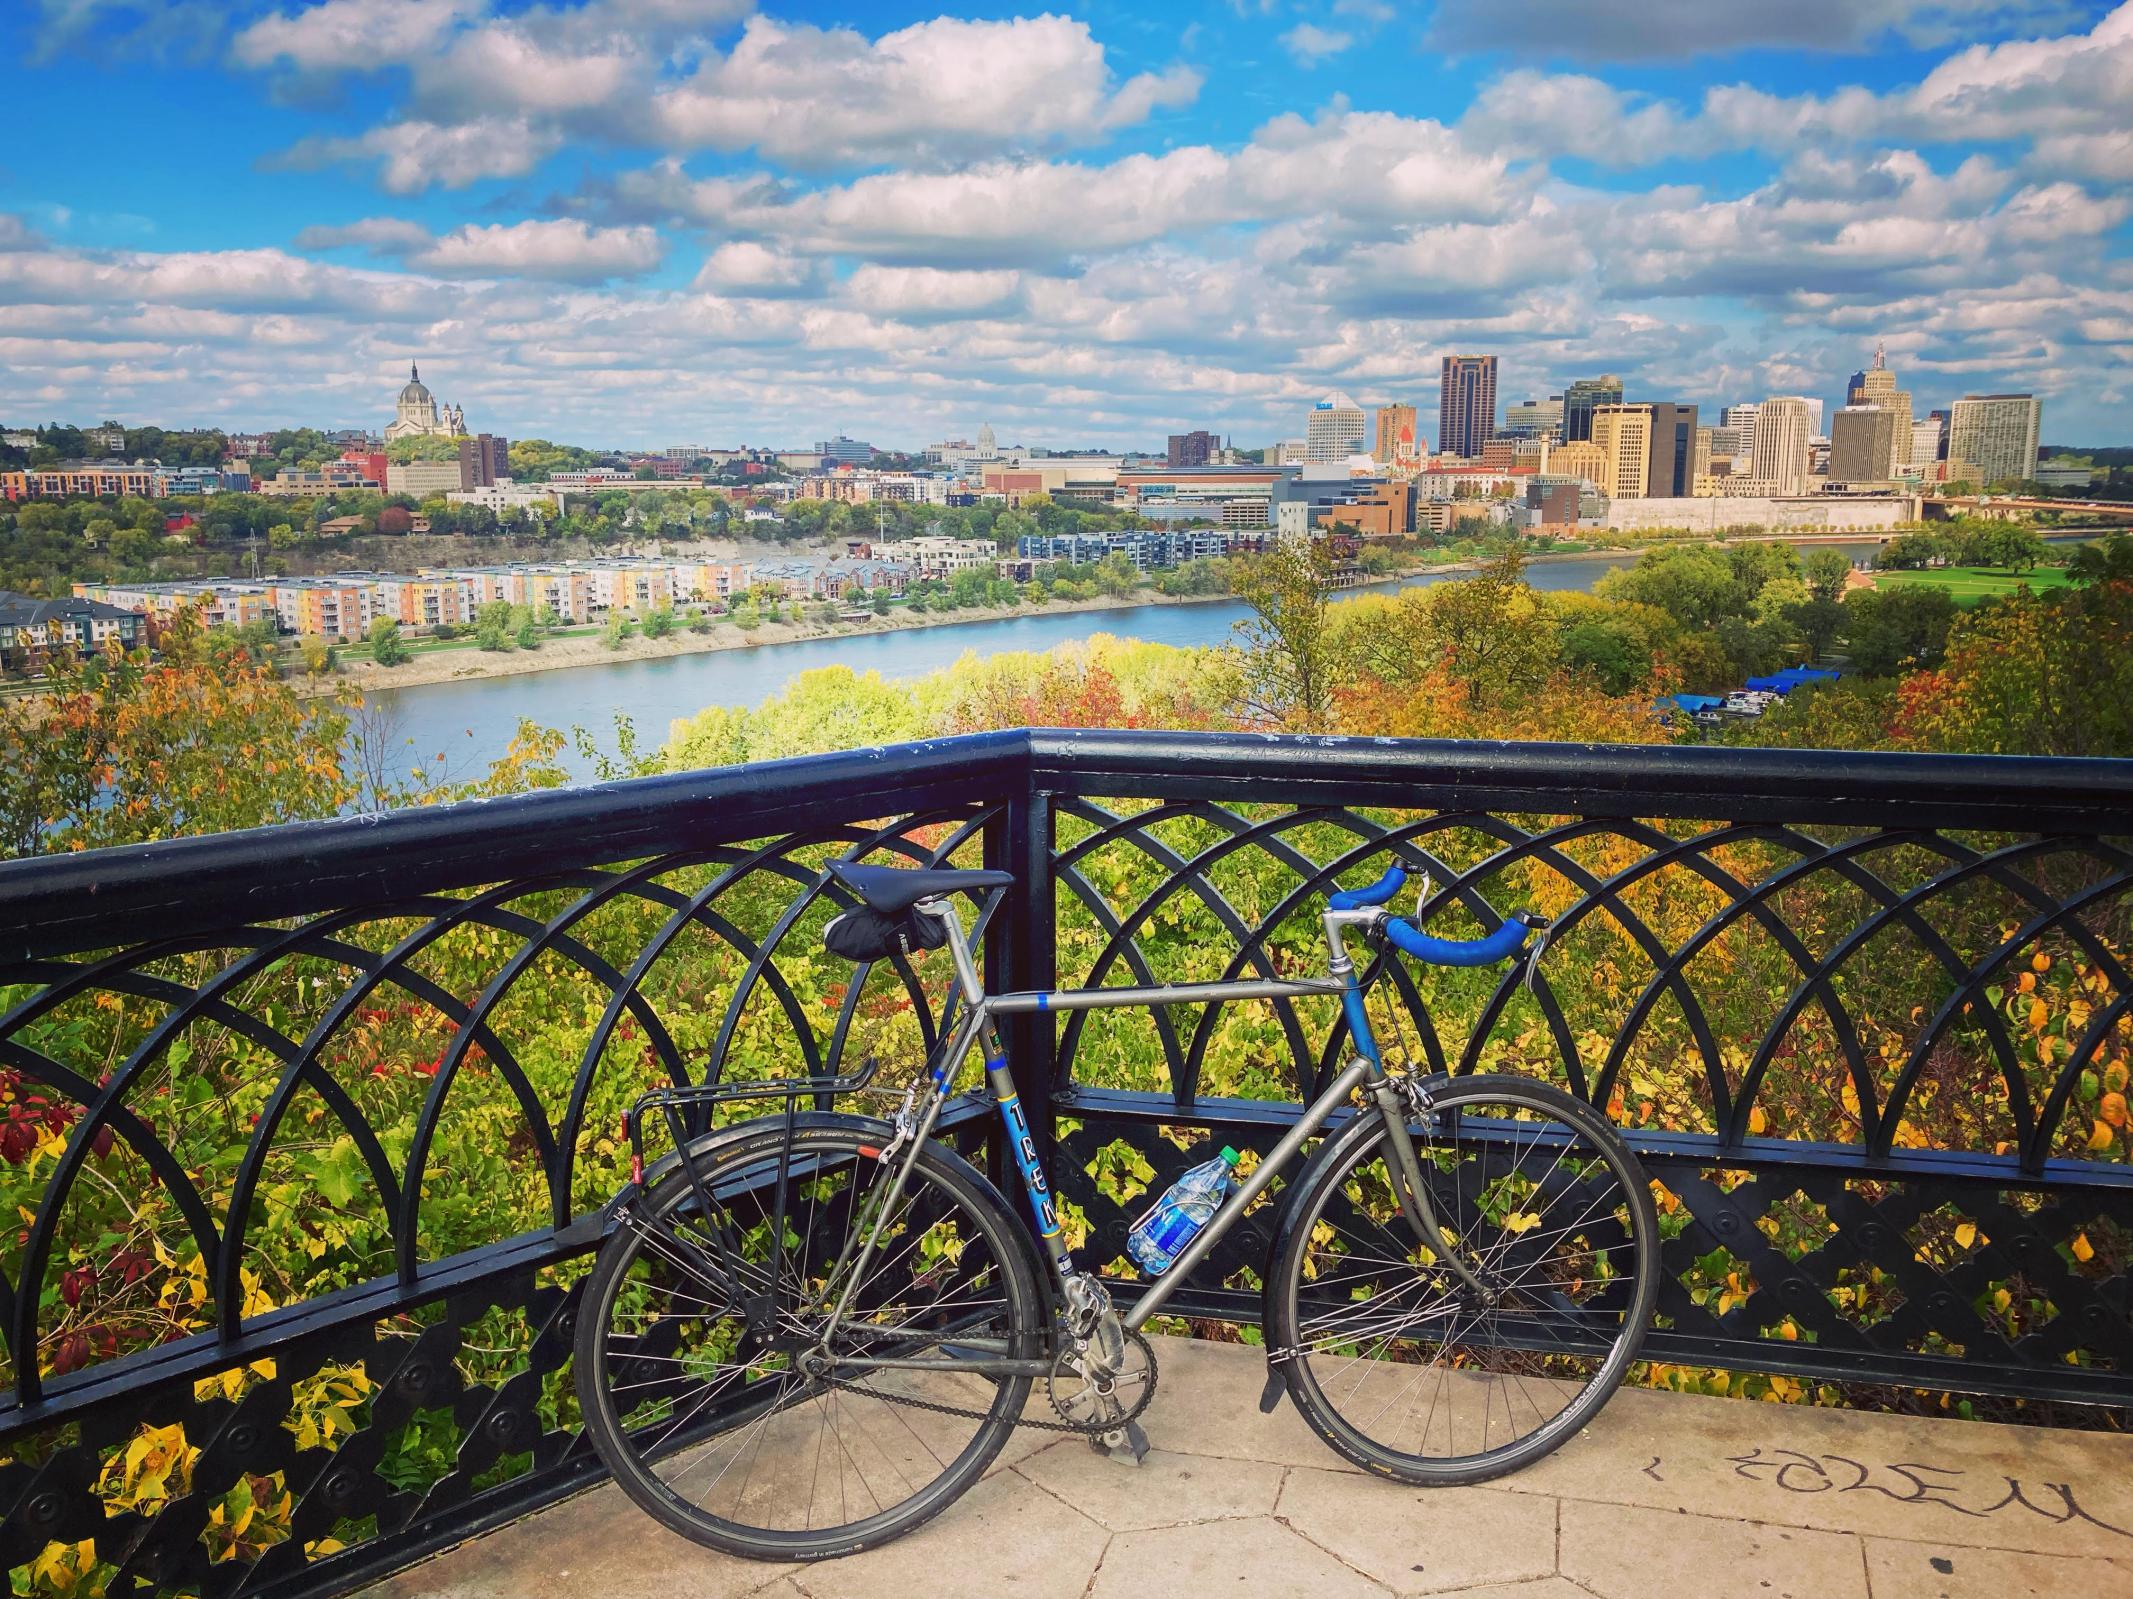 a bike leans up against a black grate overlooking the mississippi river, with the city in the background